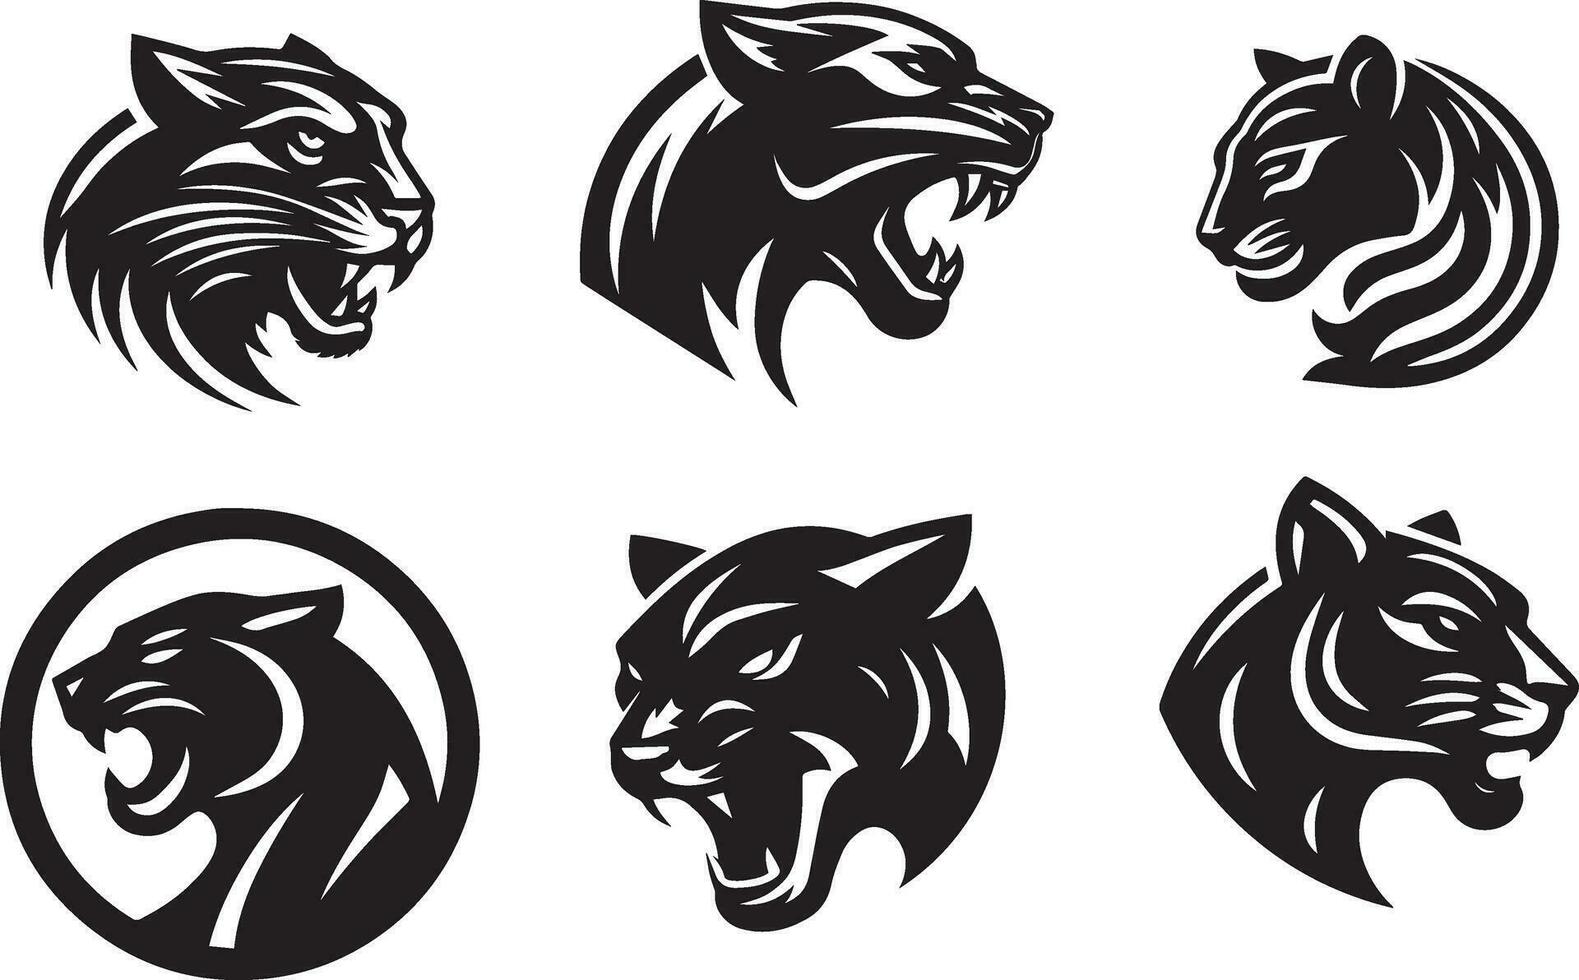 Panther logo icon vector illustration black color white background 4